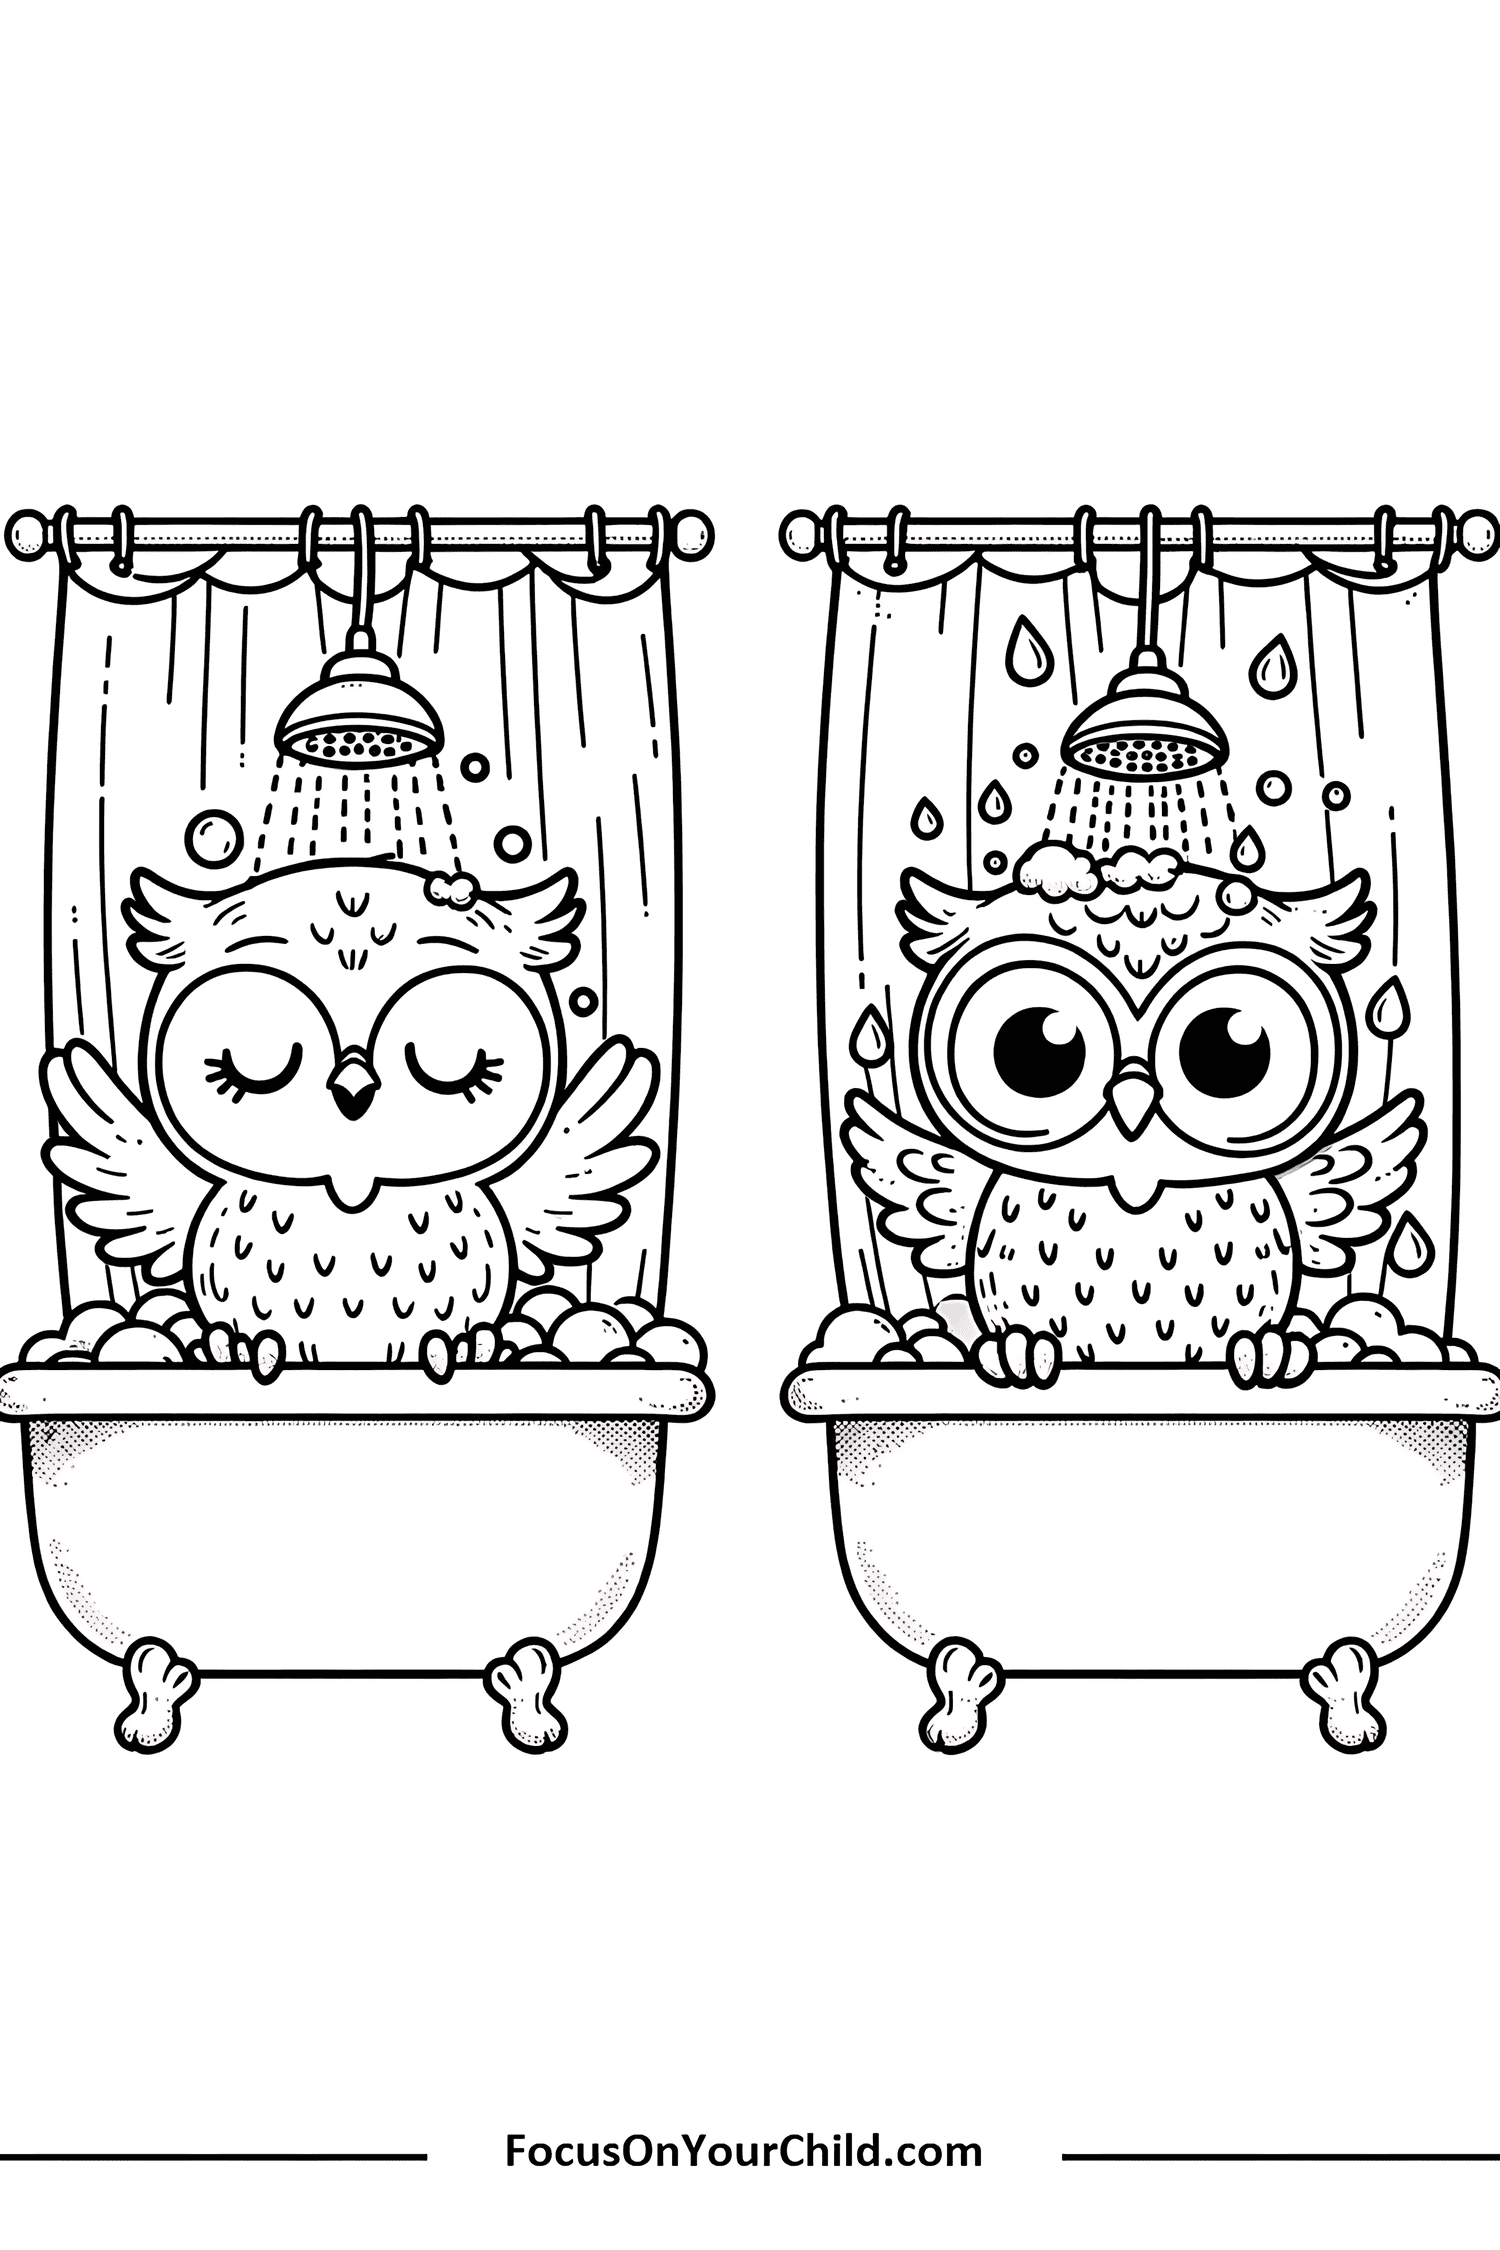 Adorable owls bathing in vintage bathtubs filled with bubbles, enjoying a shower.